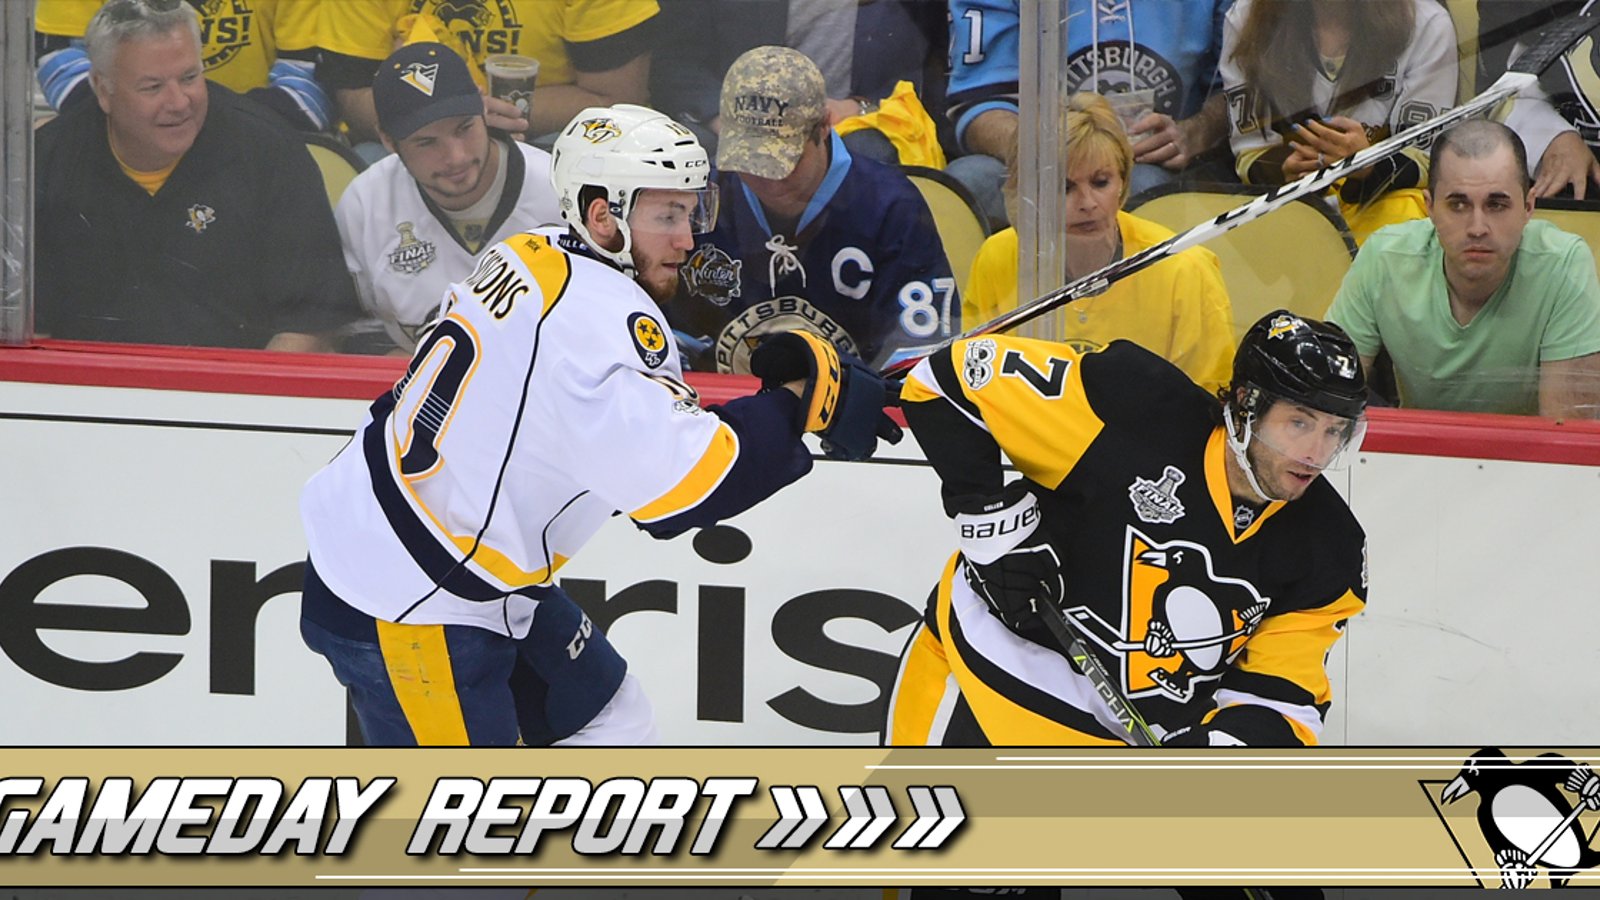 Report: 8 players missing at the Pens practice this morning.